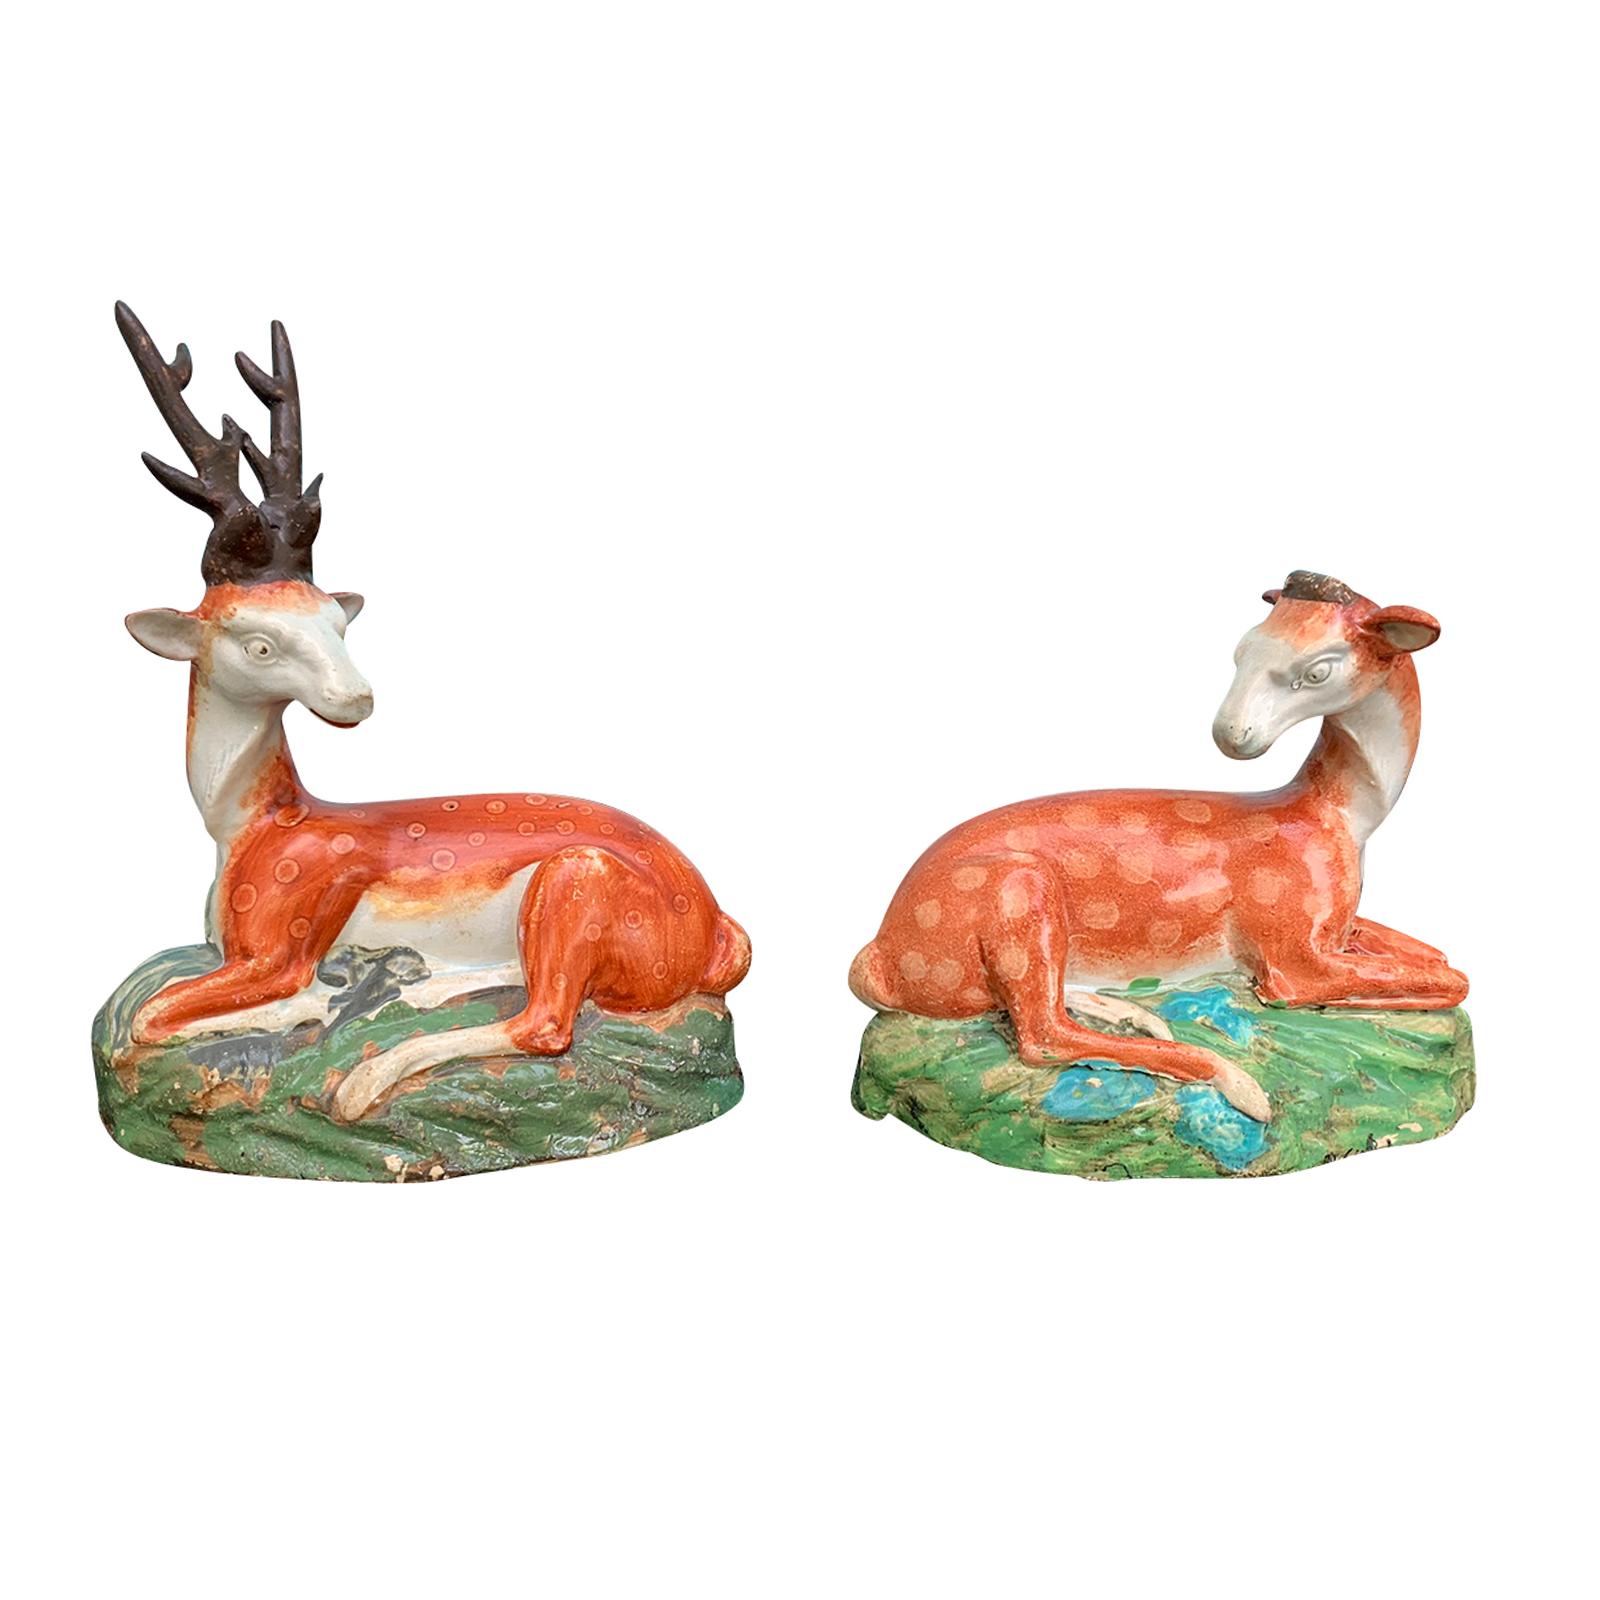 Pair of English Staffordshire Deer, Stag and Doe, circa 1820s